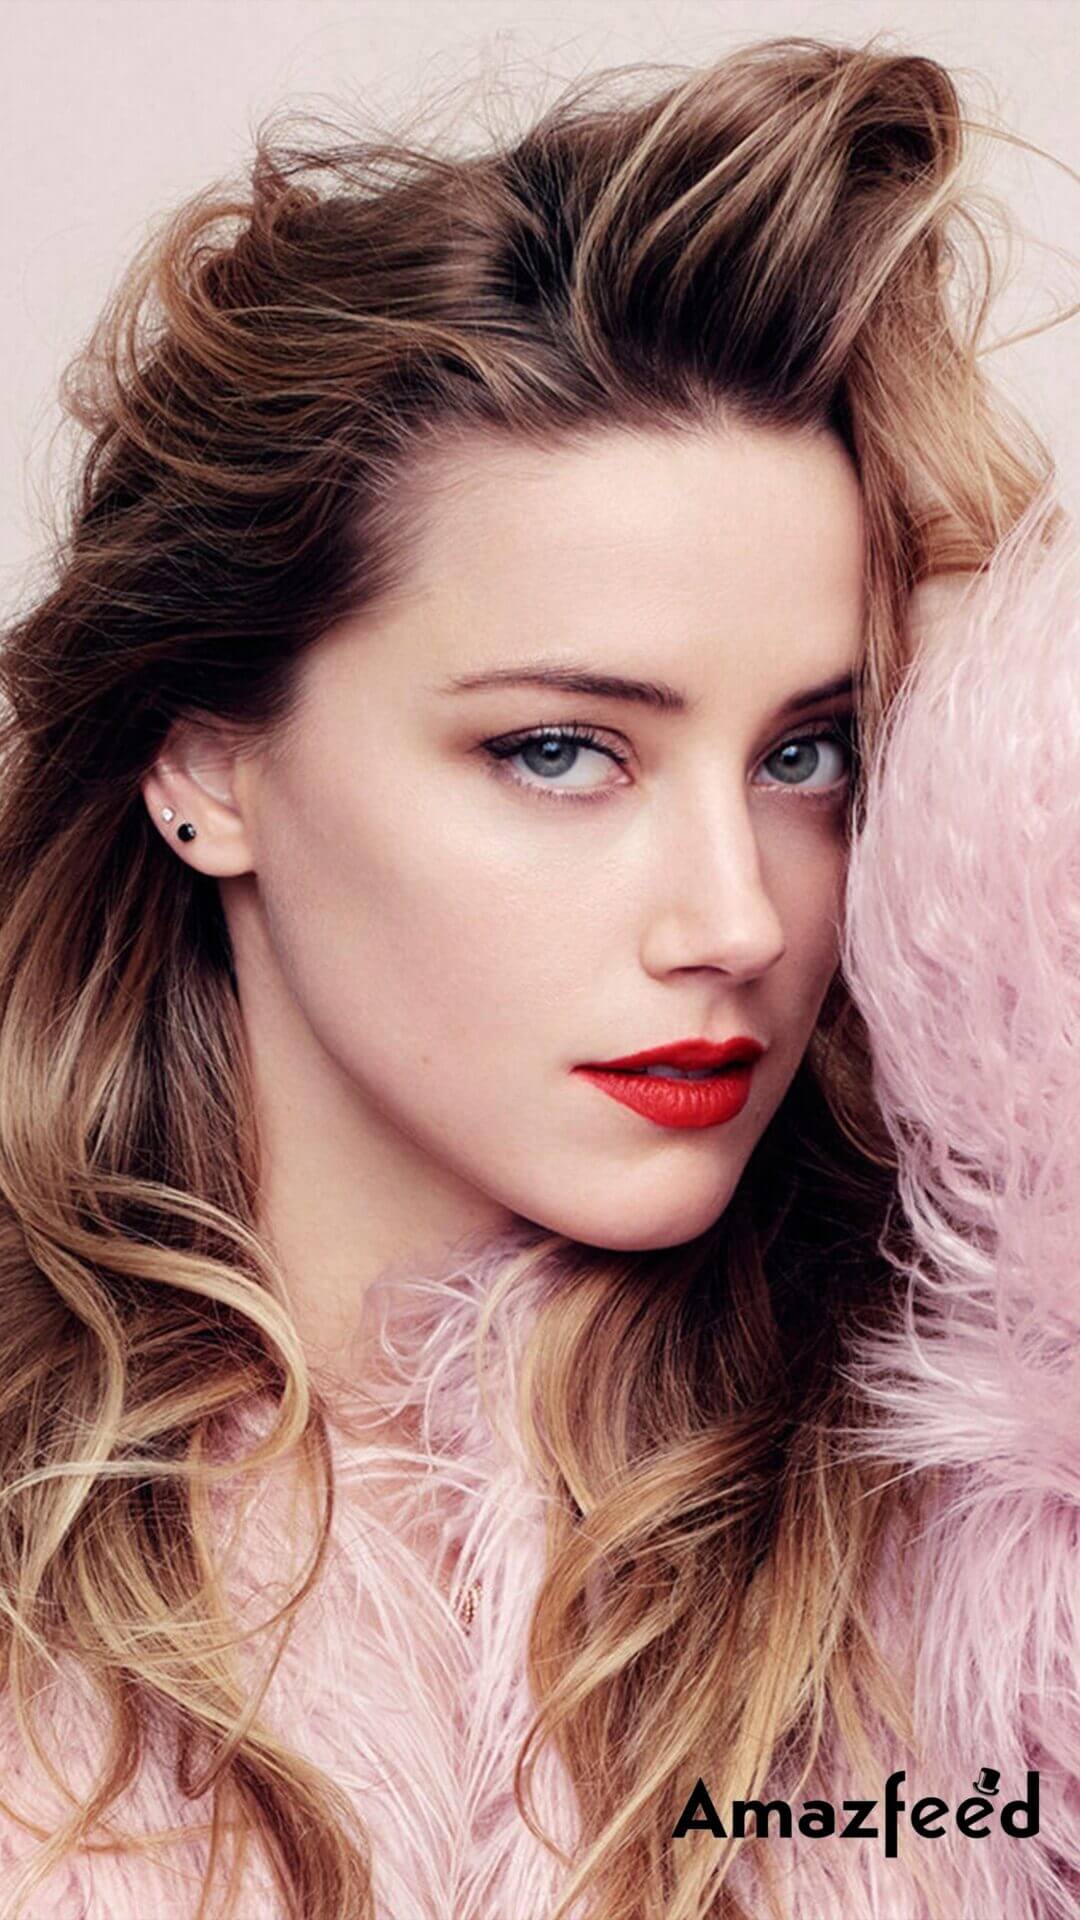 Who Is Amber Heard Dating Gorgeous-Amber-Heard-Wallpaper